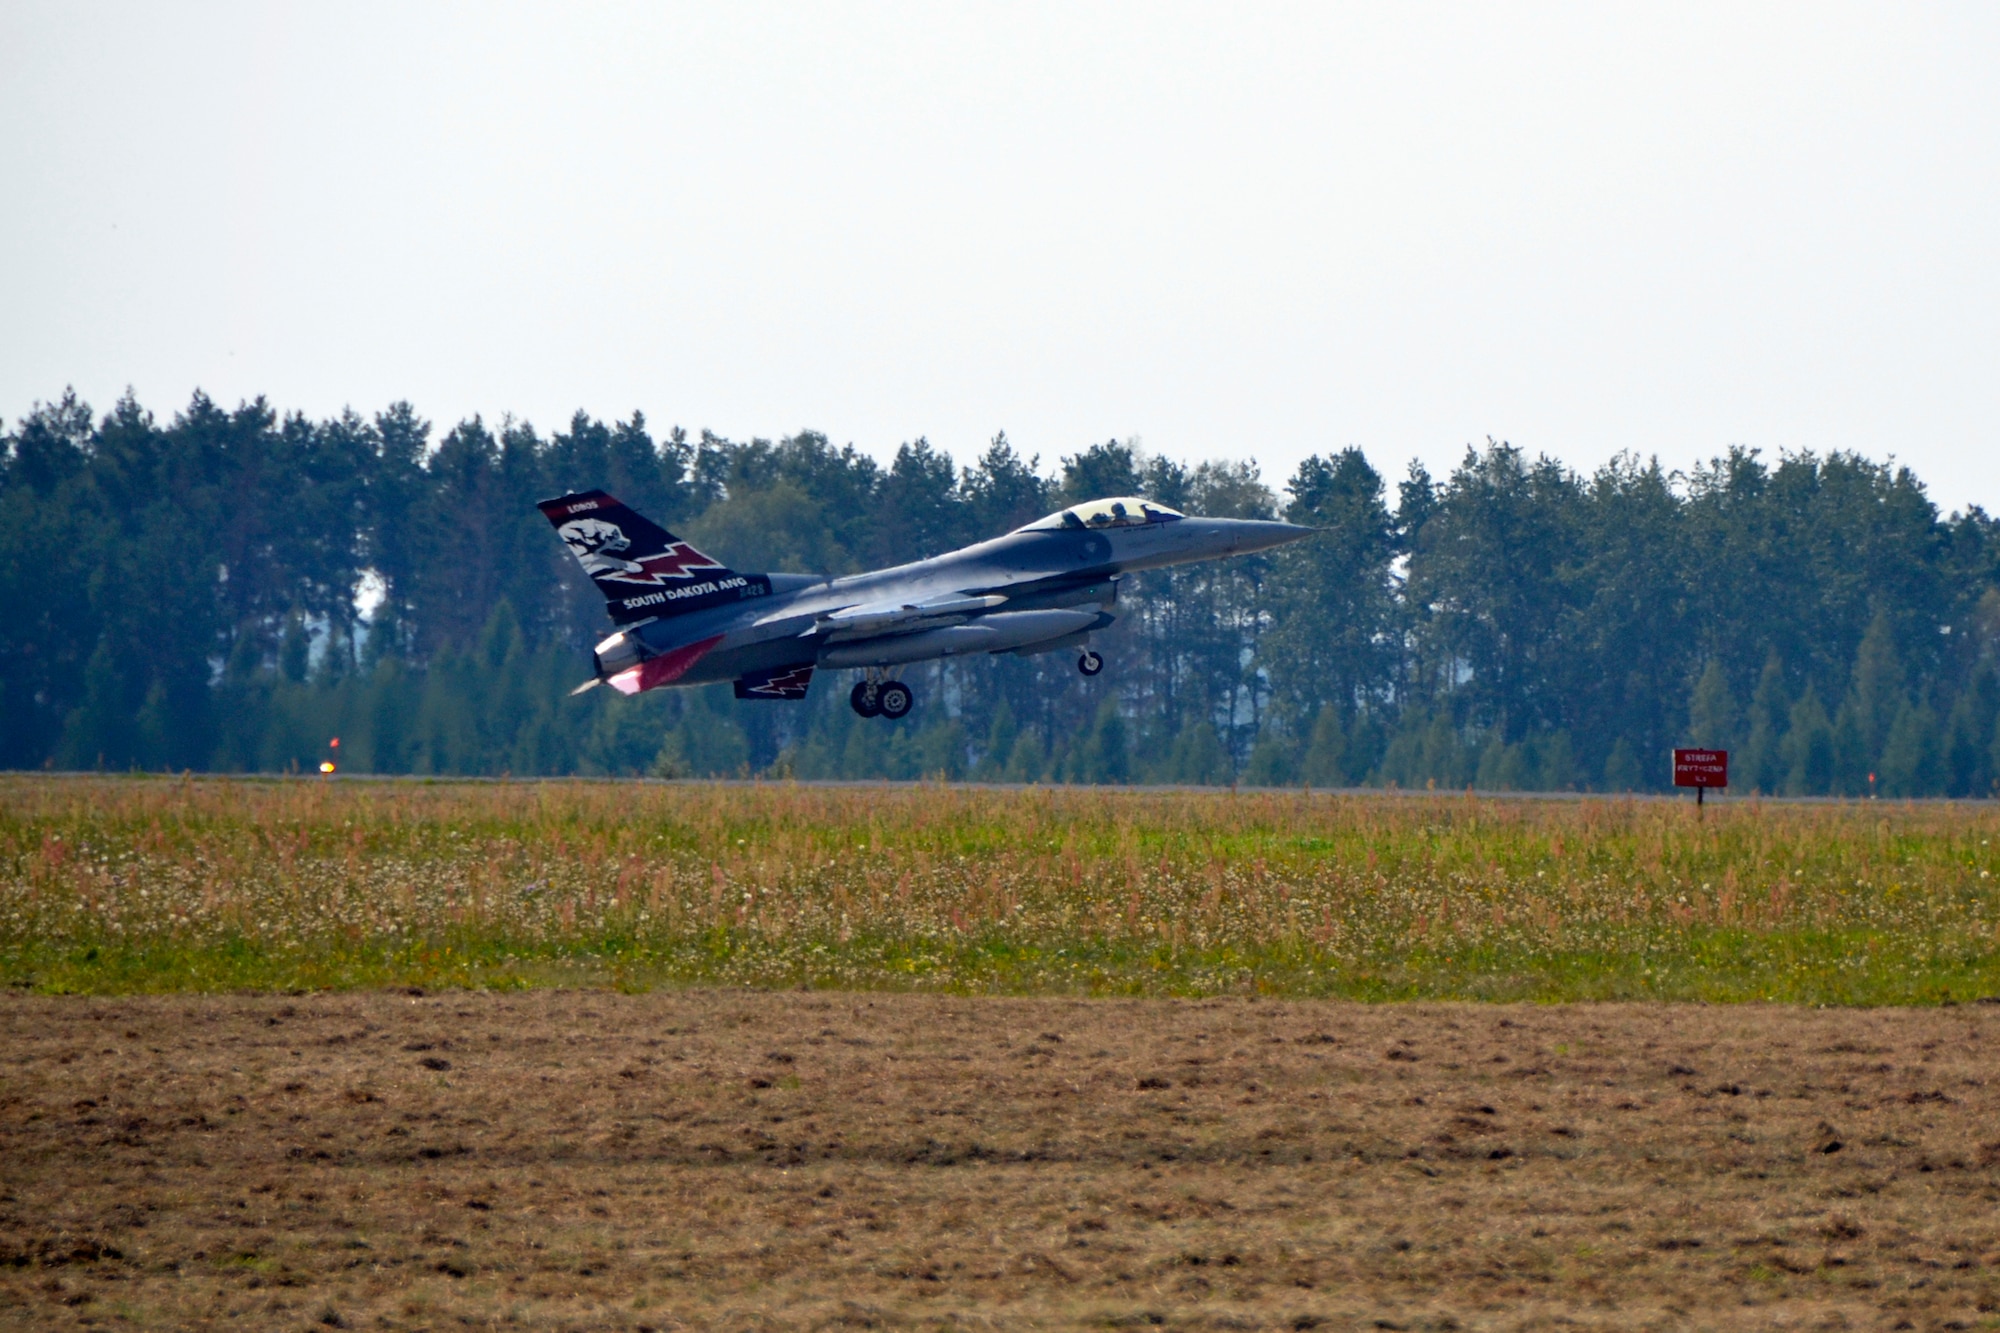 An F-16 Fighting Falcon from the South Dakota Air National Guard, 114th Fighter Wing lands at Lask Air Base, Sept. 3. More than 100 members of the unit are deployed in support of Aviation Detachment 16-4, a bilateral training exercise between the U.S. and Polish forces. (U.S. Air National Guard photo by Capt. Amy Rittberger/Released)